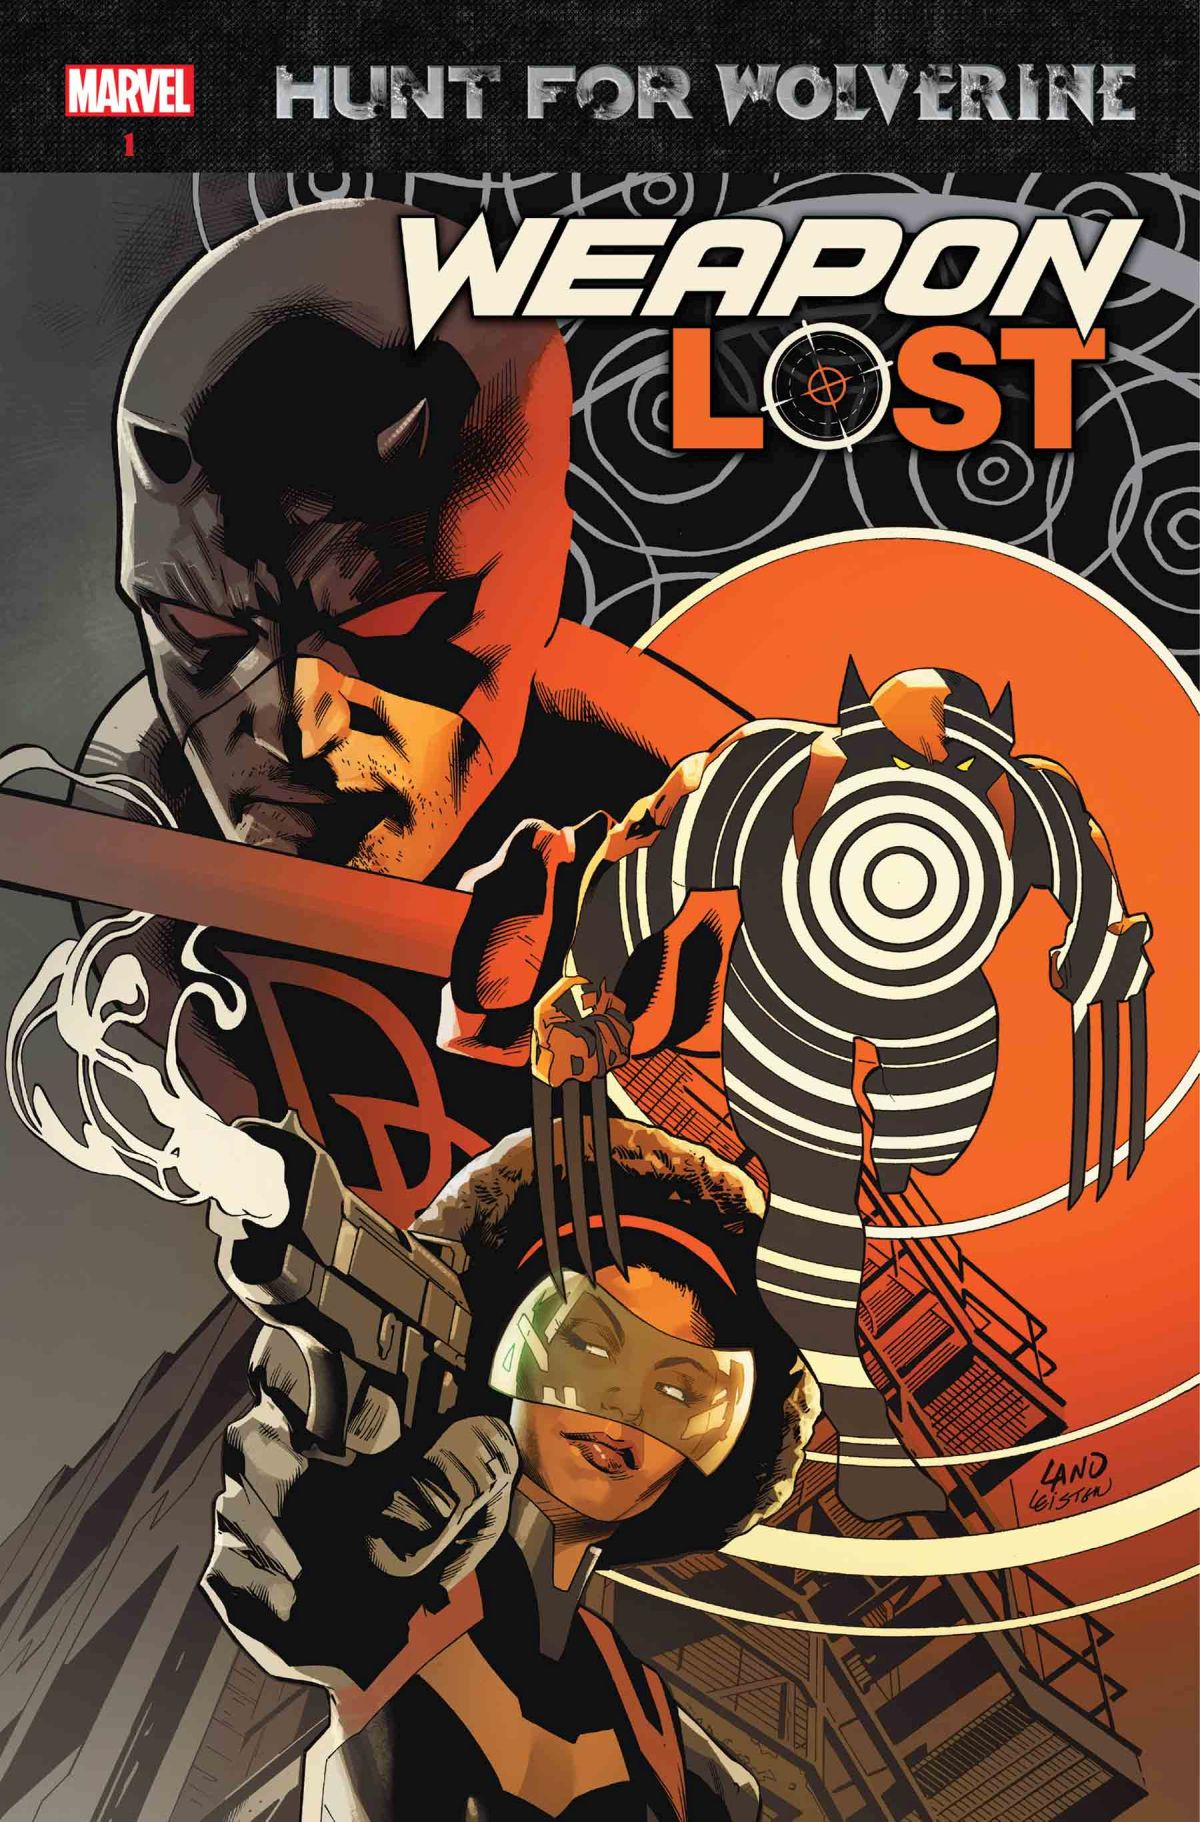 HUNT FOR WOLVERINE: Weapon Lost #1 (of 4)